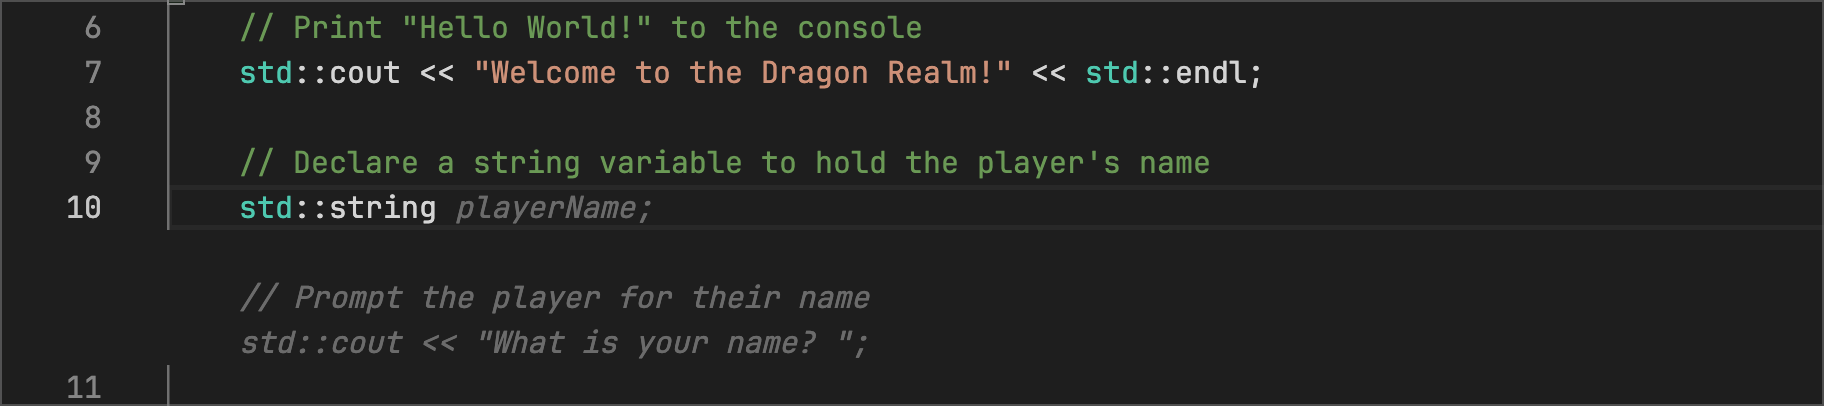 adventure.cpp - Code Suggestions suggests welcoming the player with the playerName variable